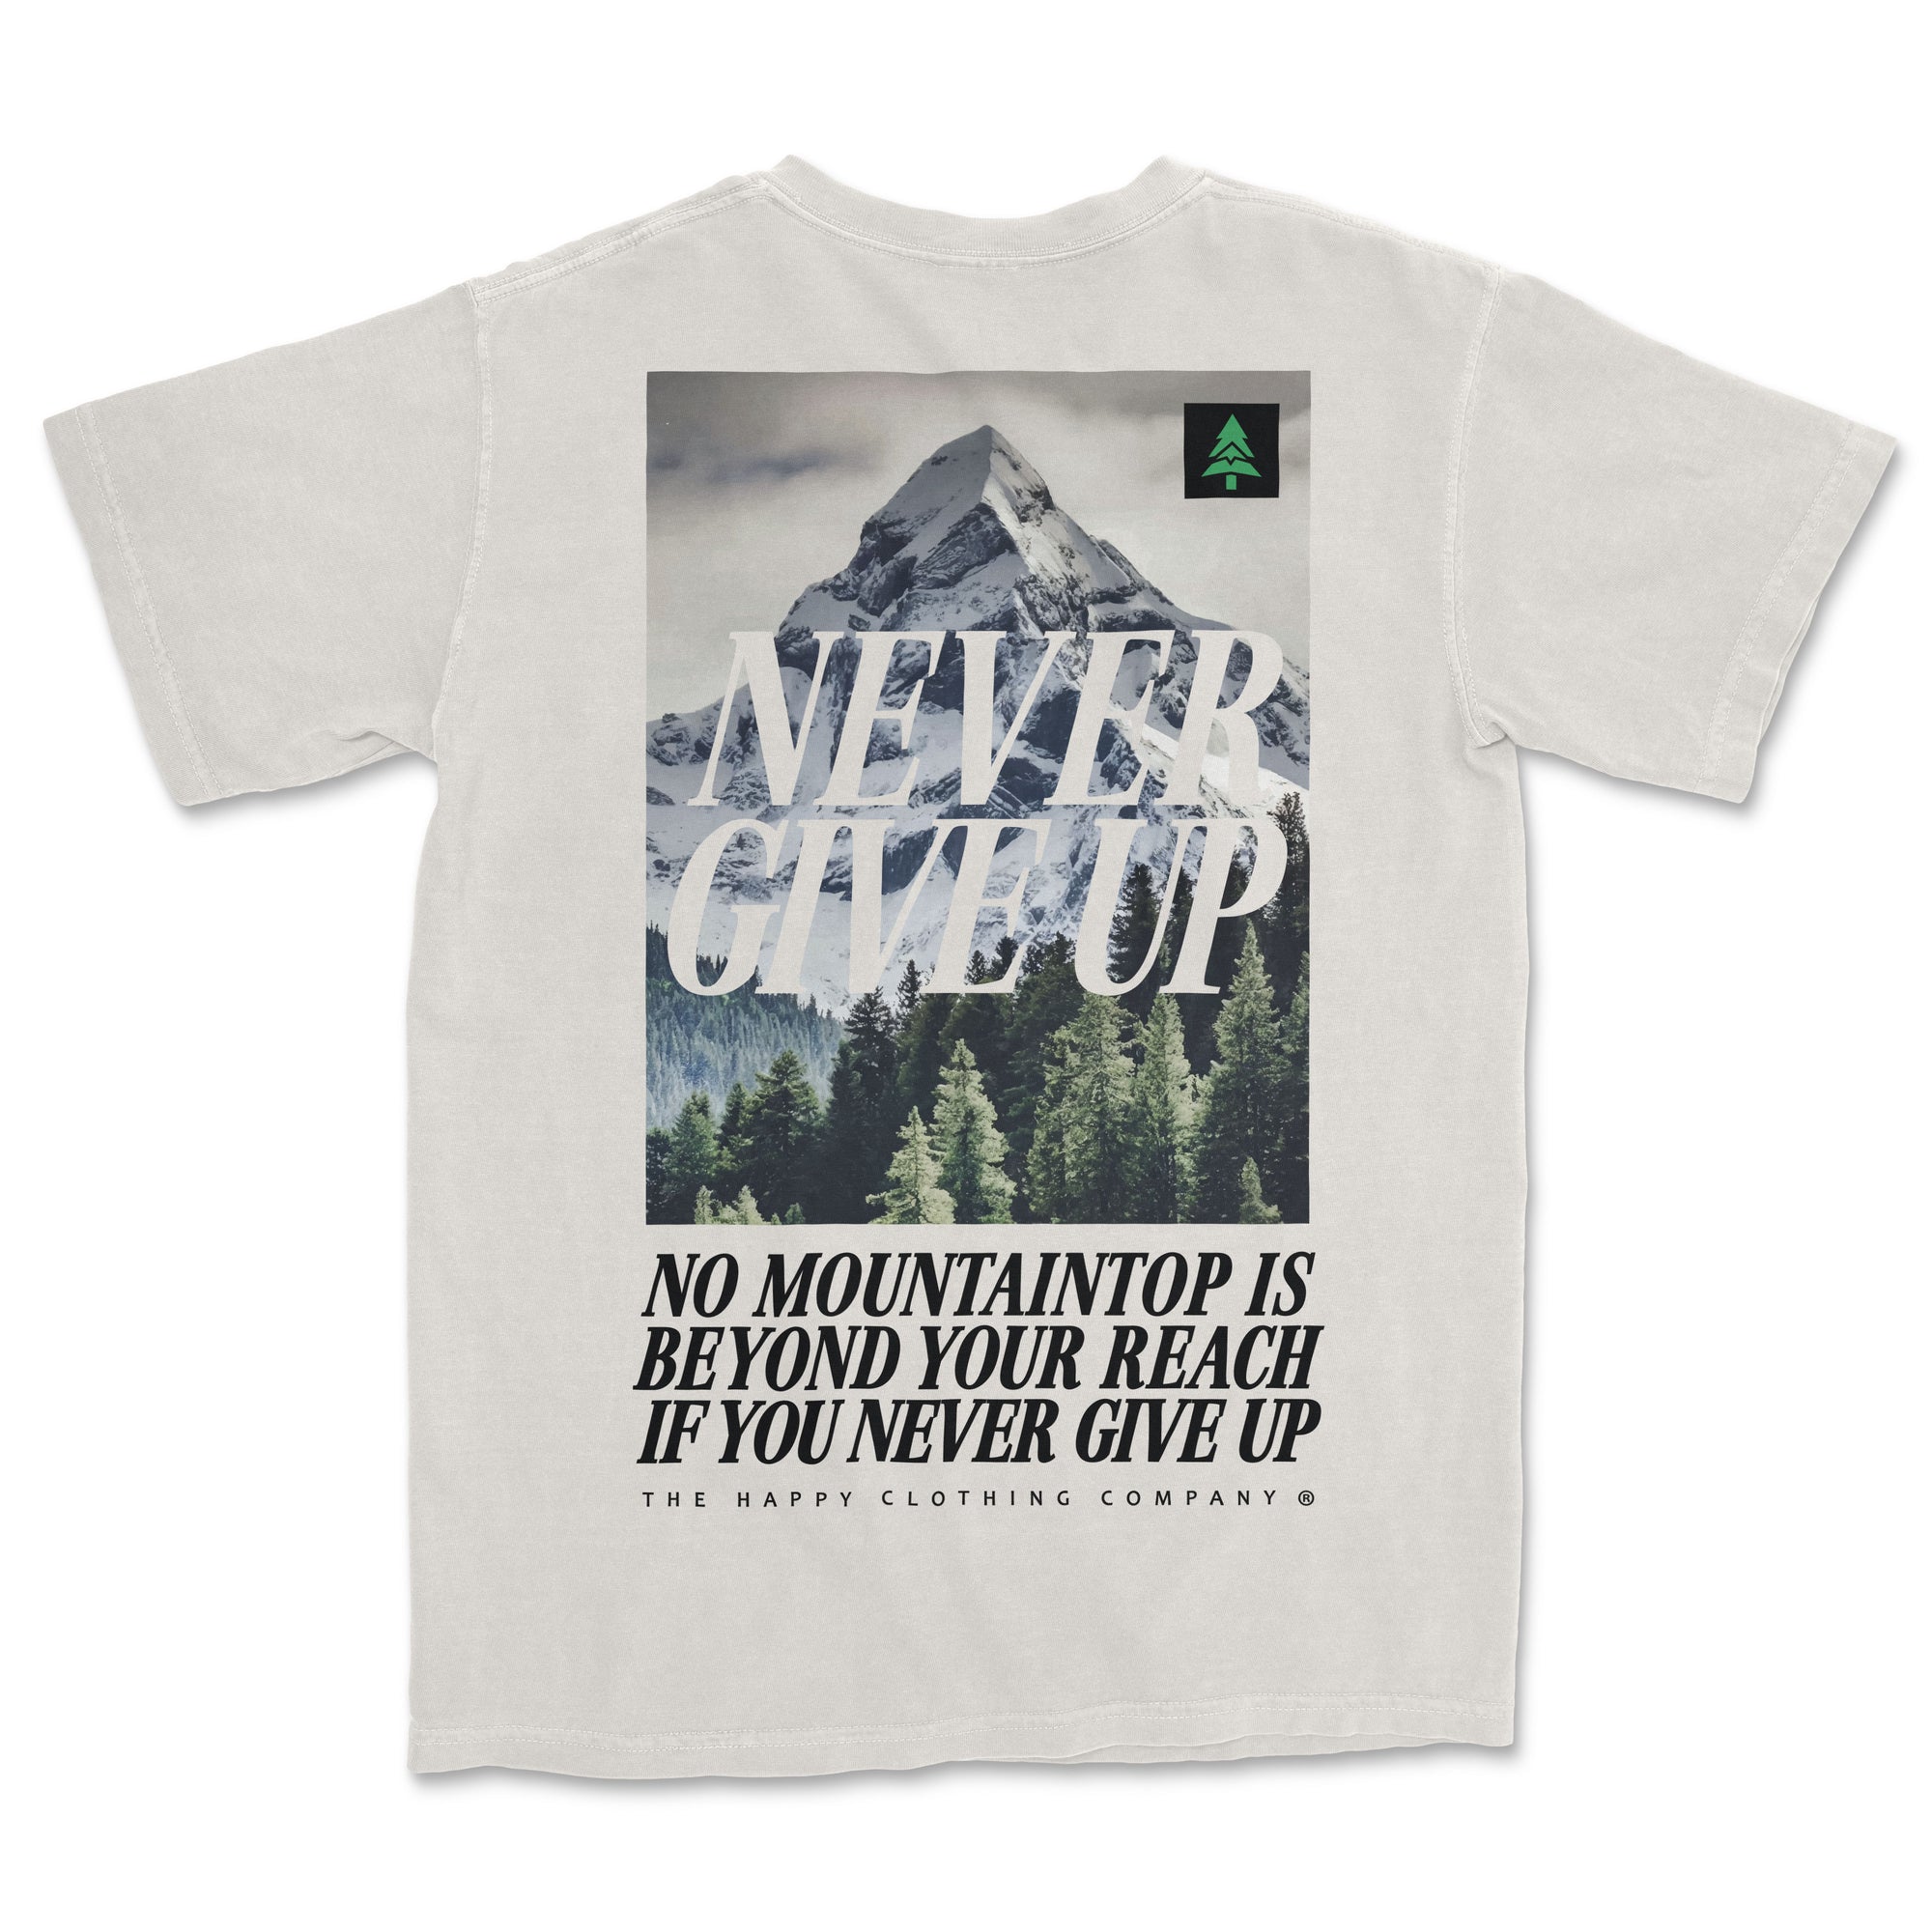 Never Give Up Back Print 'Vintage Tee' | Oversized Heavyweight |